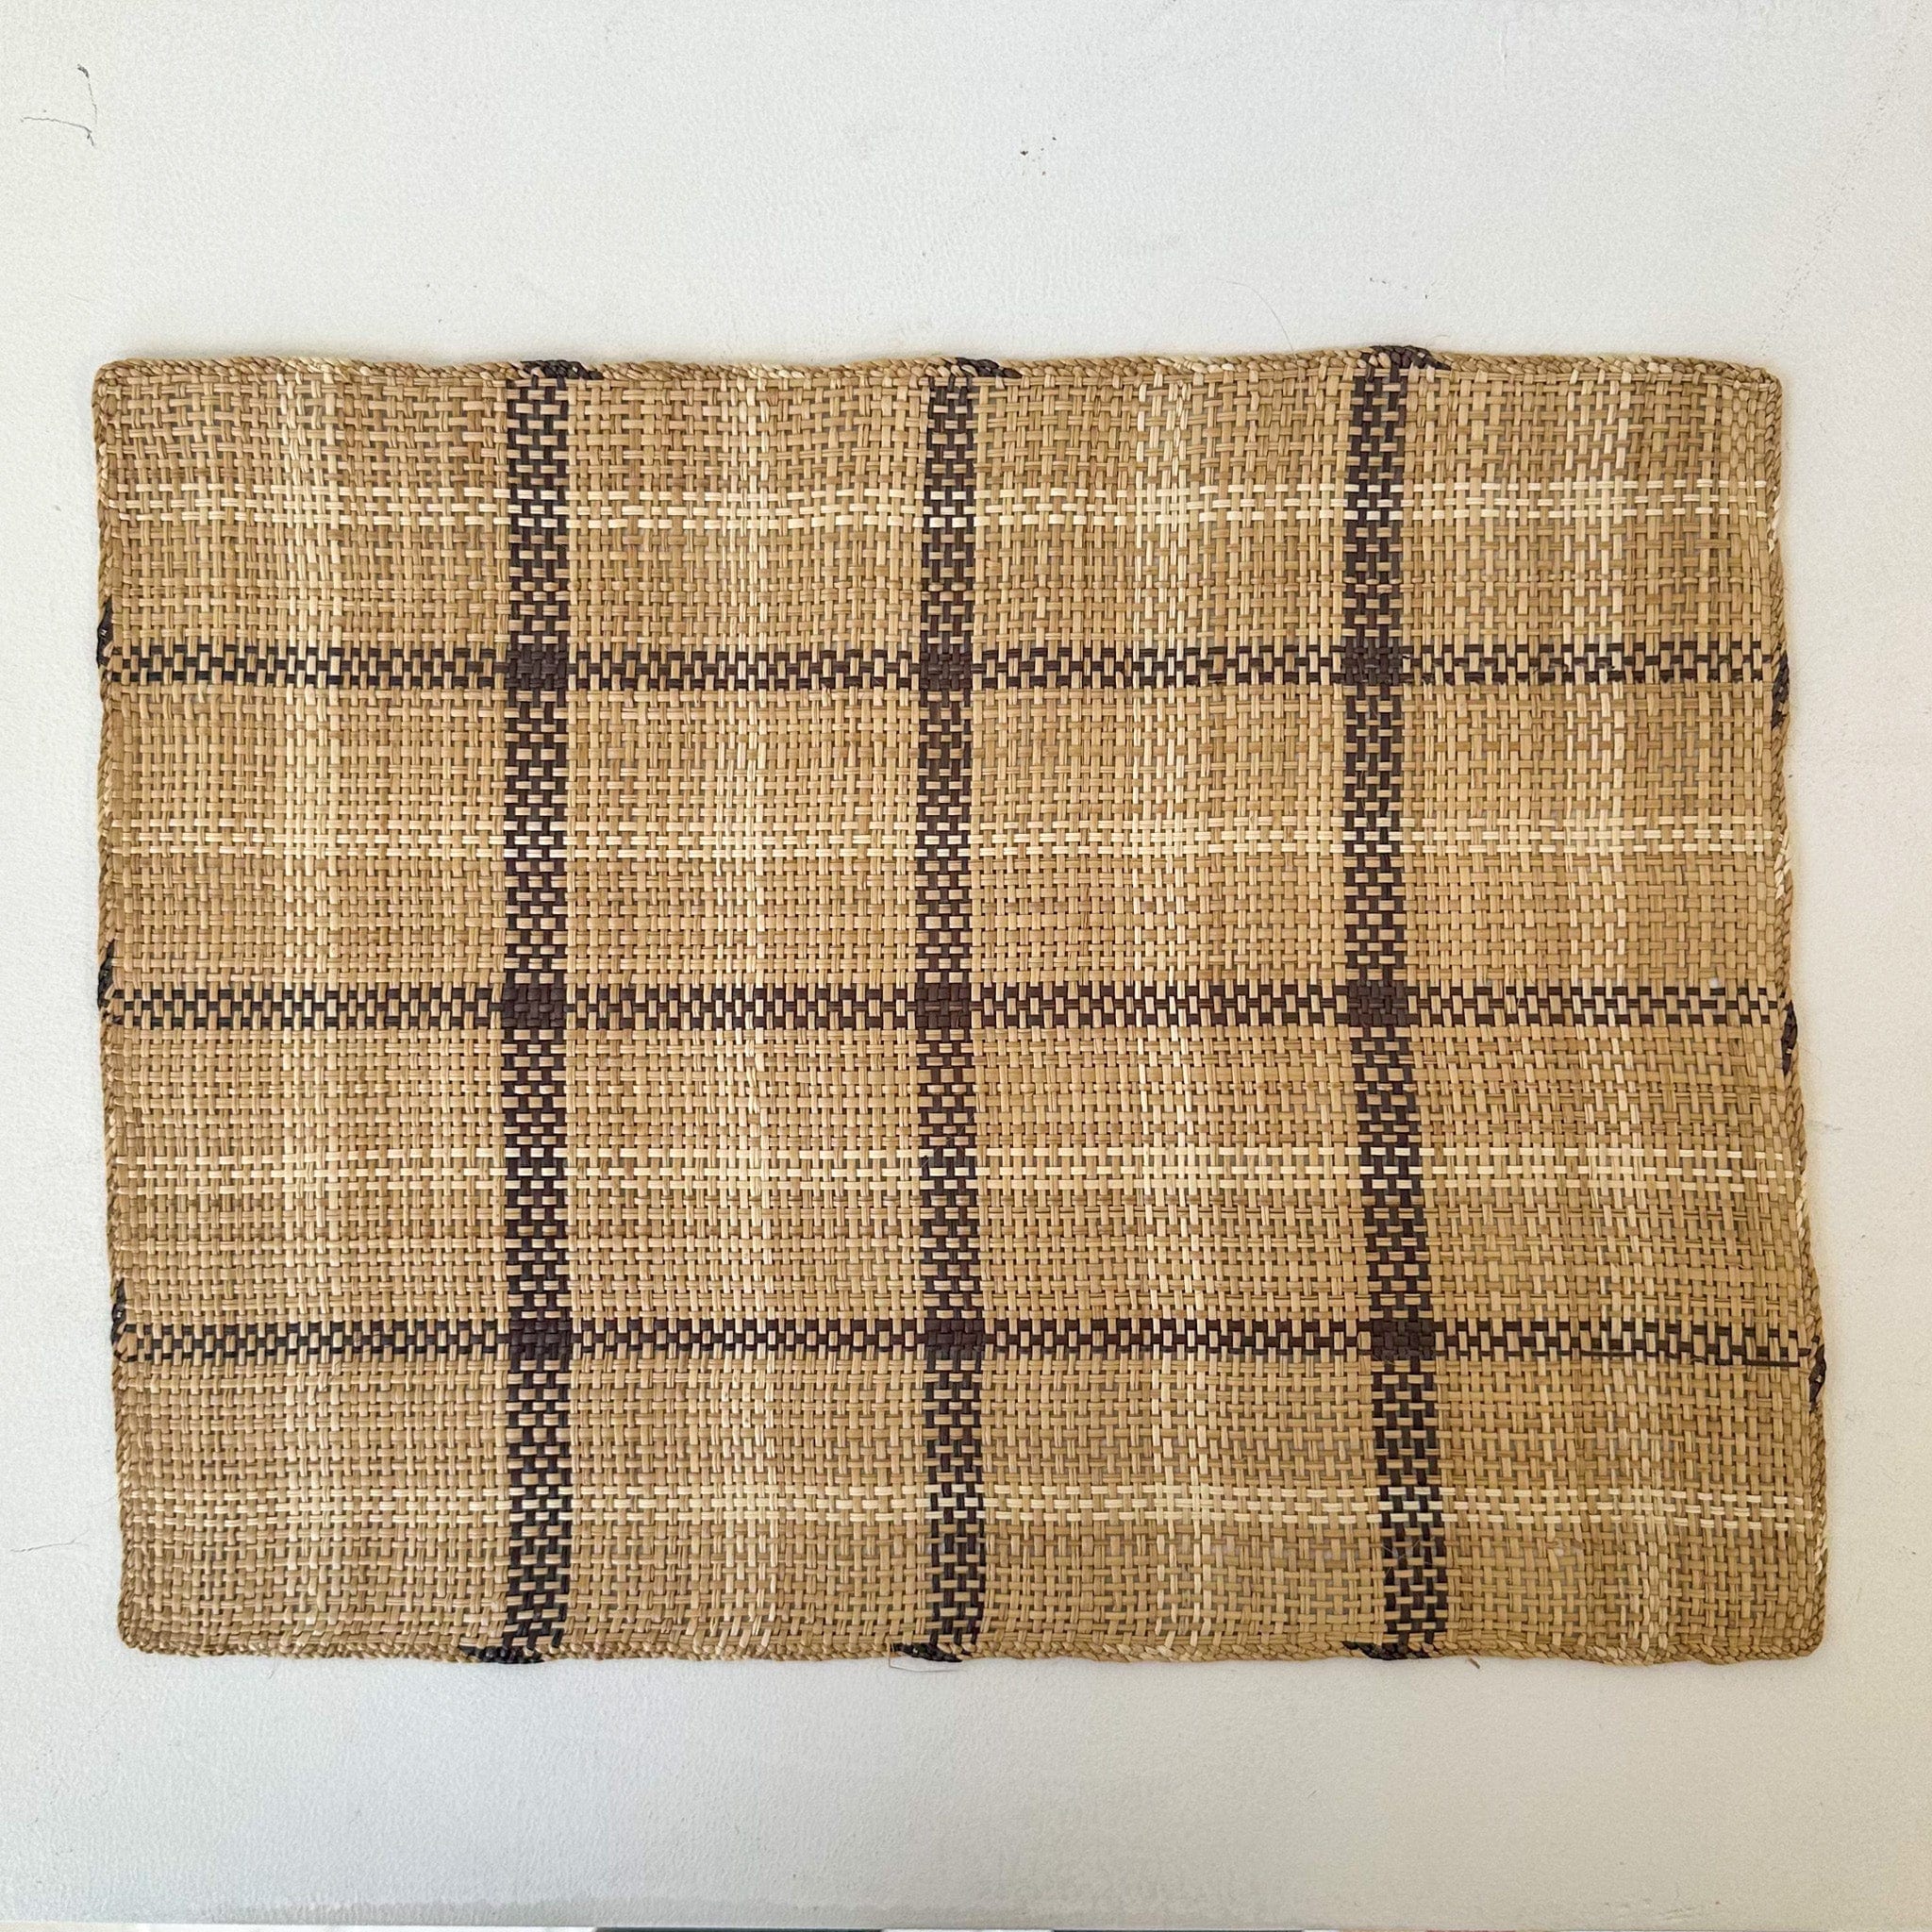 Guanabana Placemats Straw placemat in Natural and Brown Plaid by Guanabana